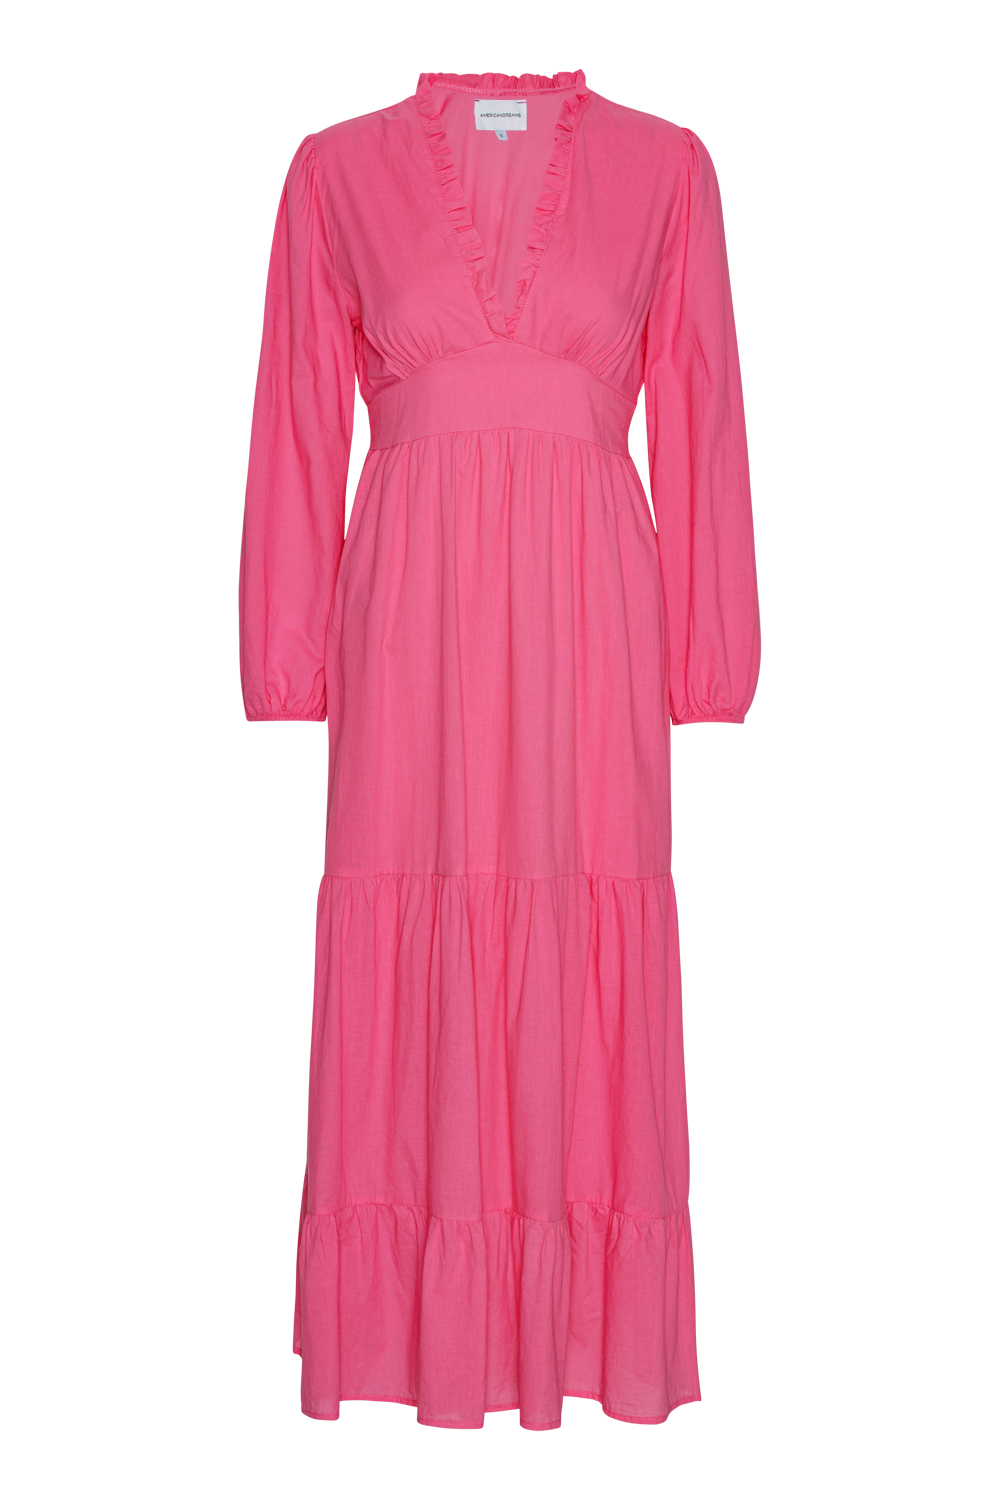 Umi Long Solid Cotton Pink